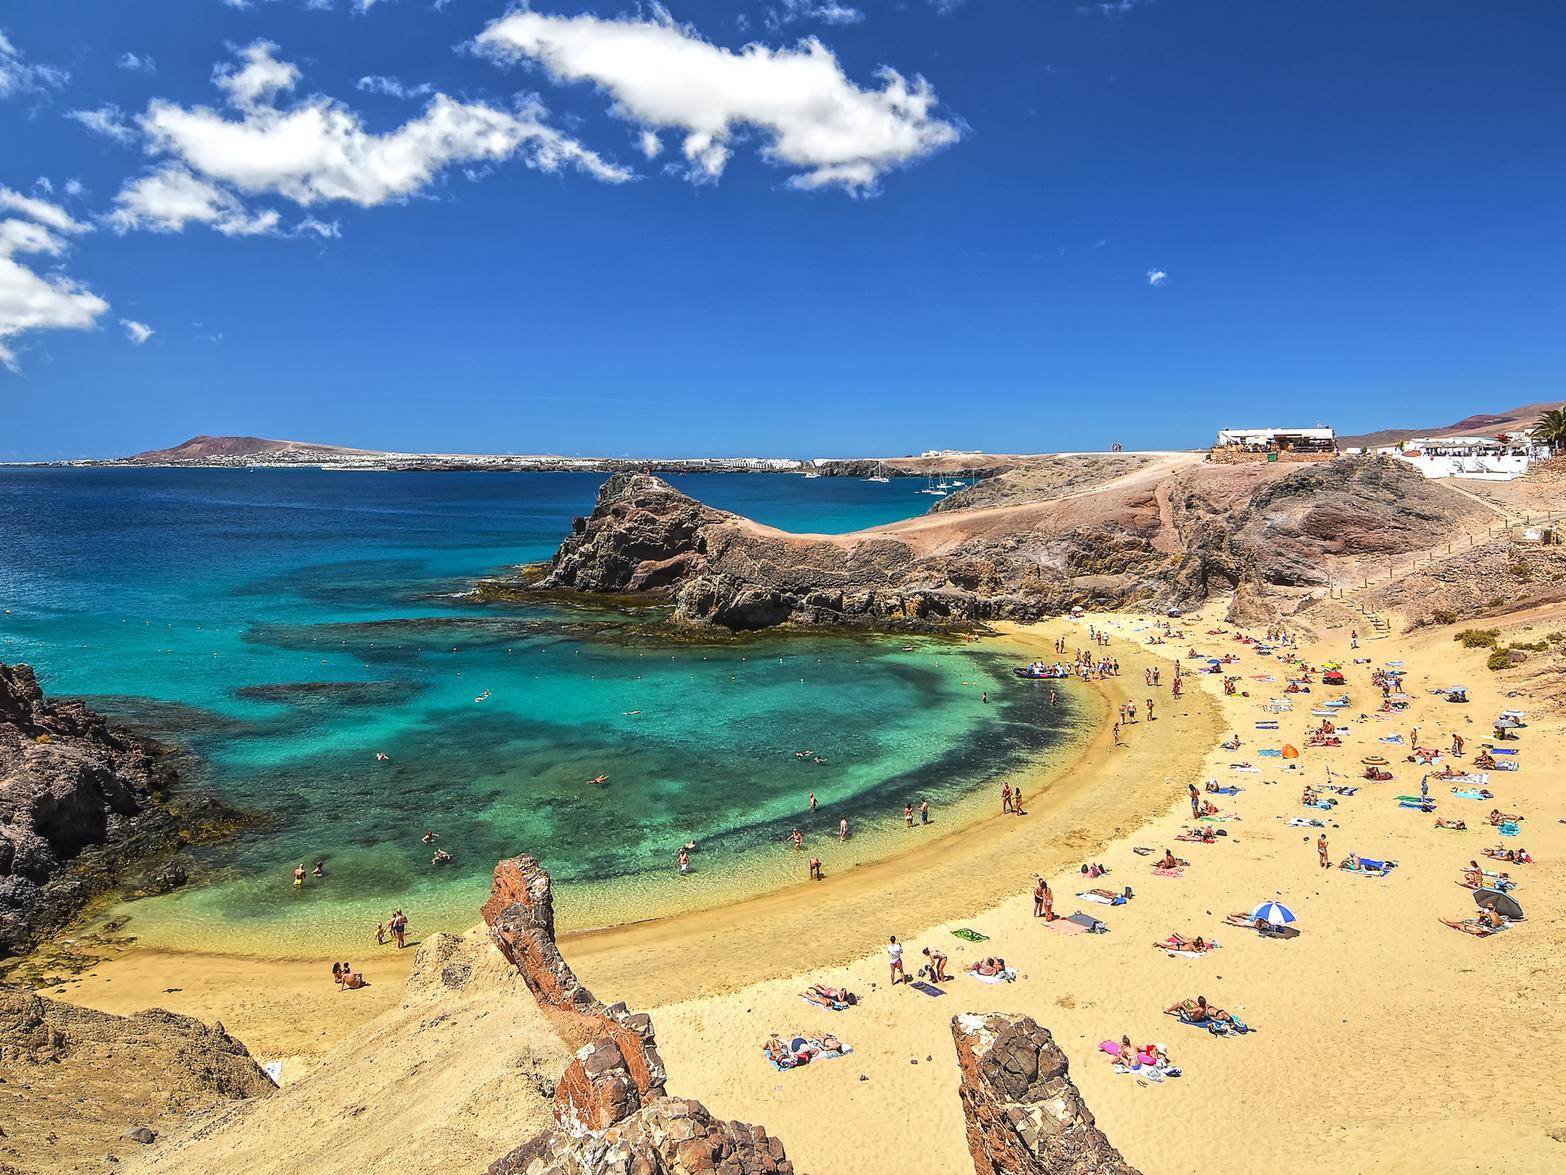 Lanzarote is the hottest of the Canary Islands and is popular with holidaymakers all year round. In April, temperatures will rise to just under 24 degrees, but it may be windy at times.